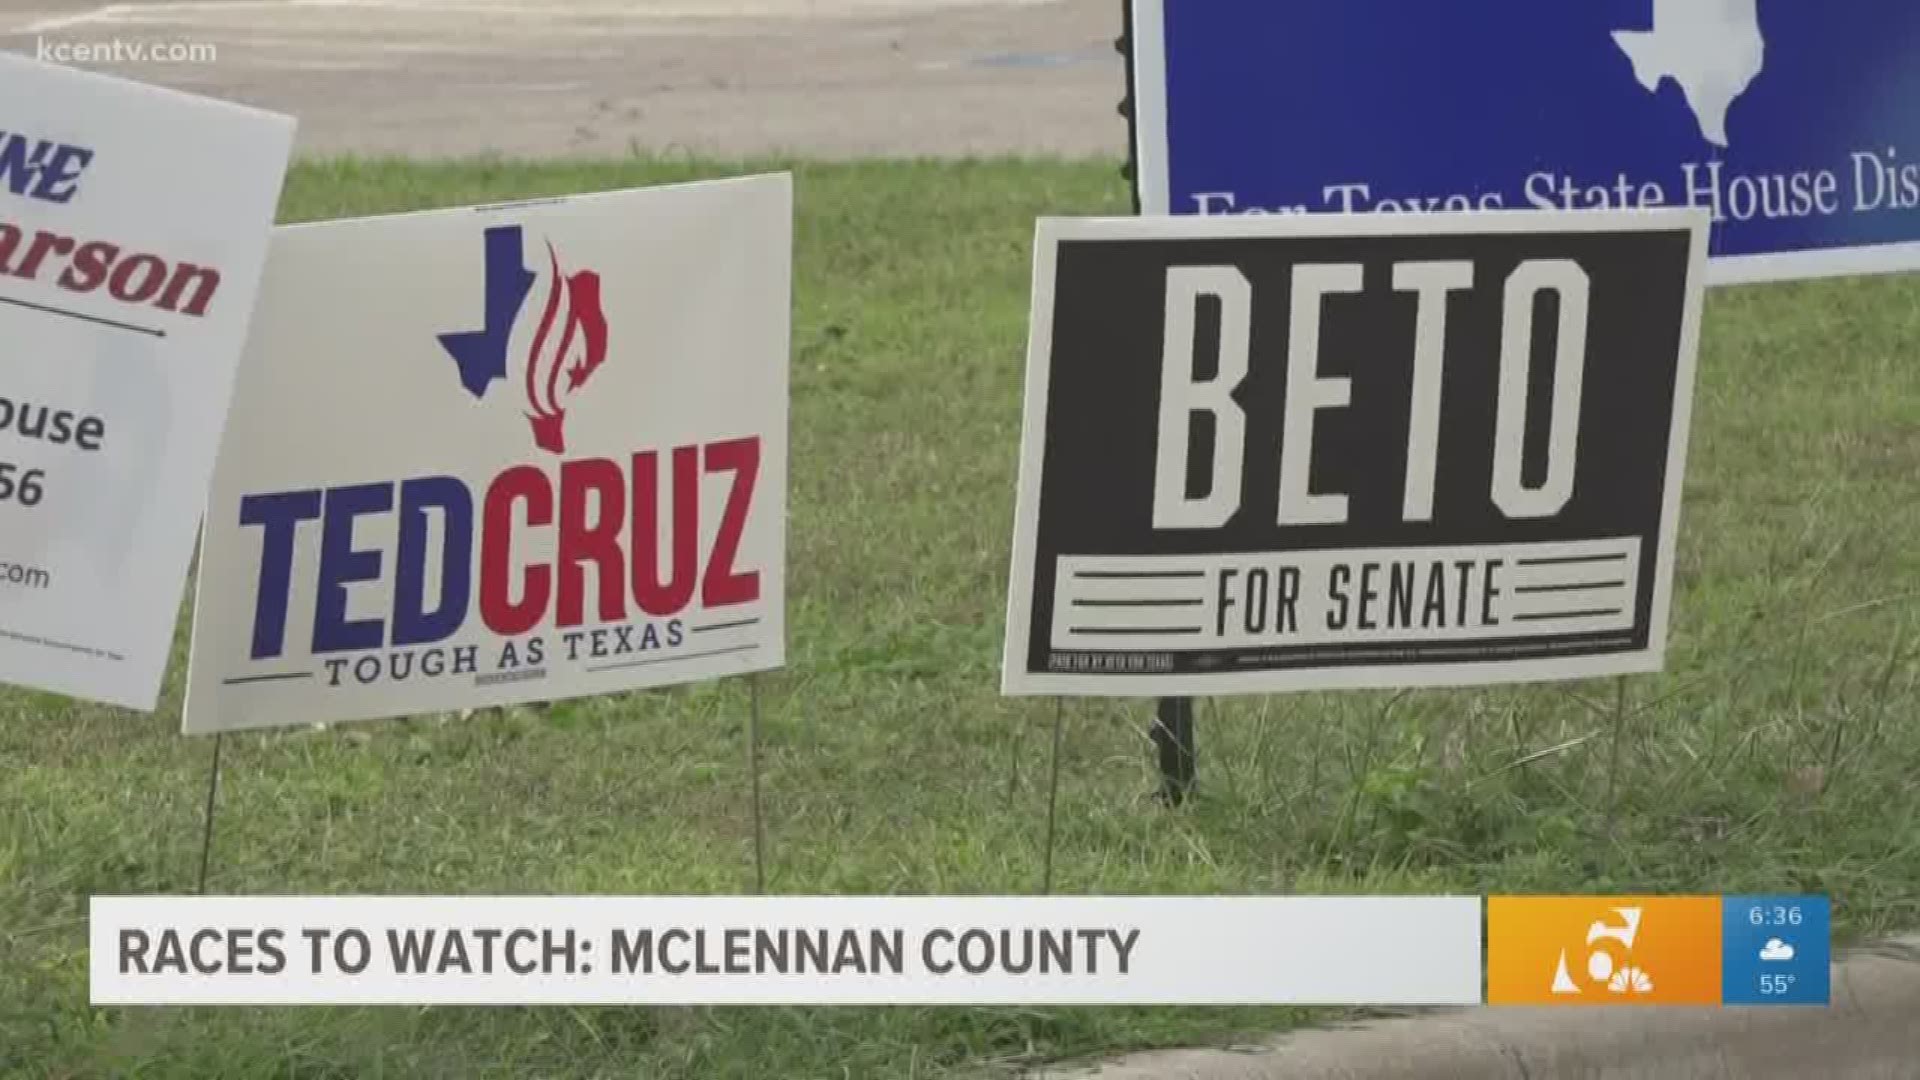 Races to watch in McLennan County on Election Day